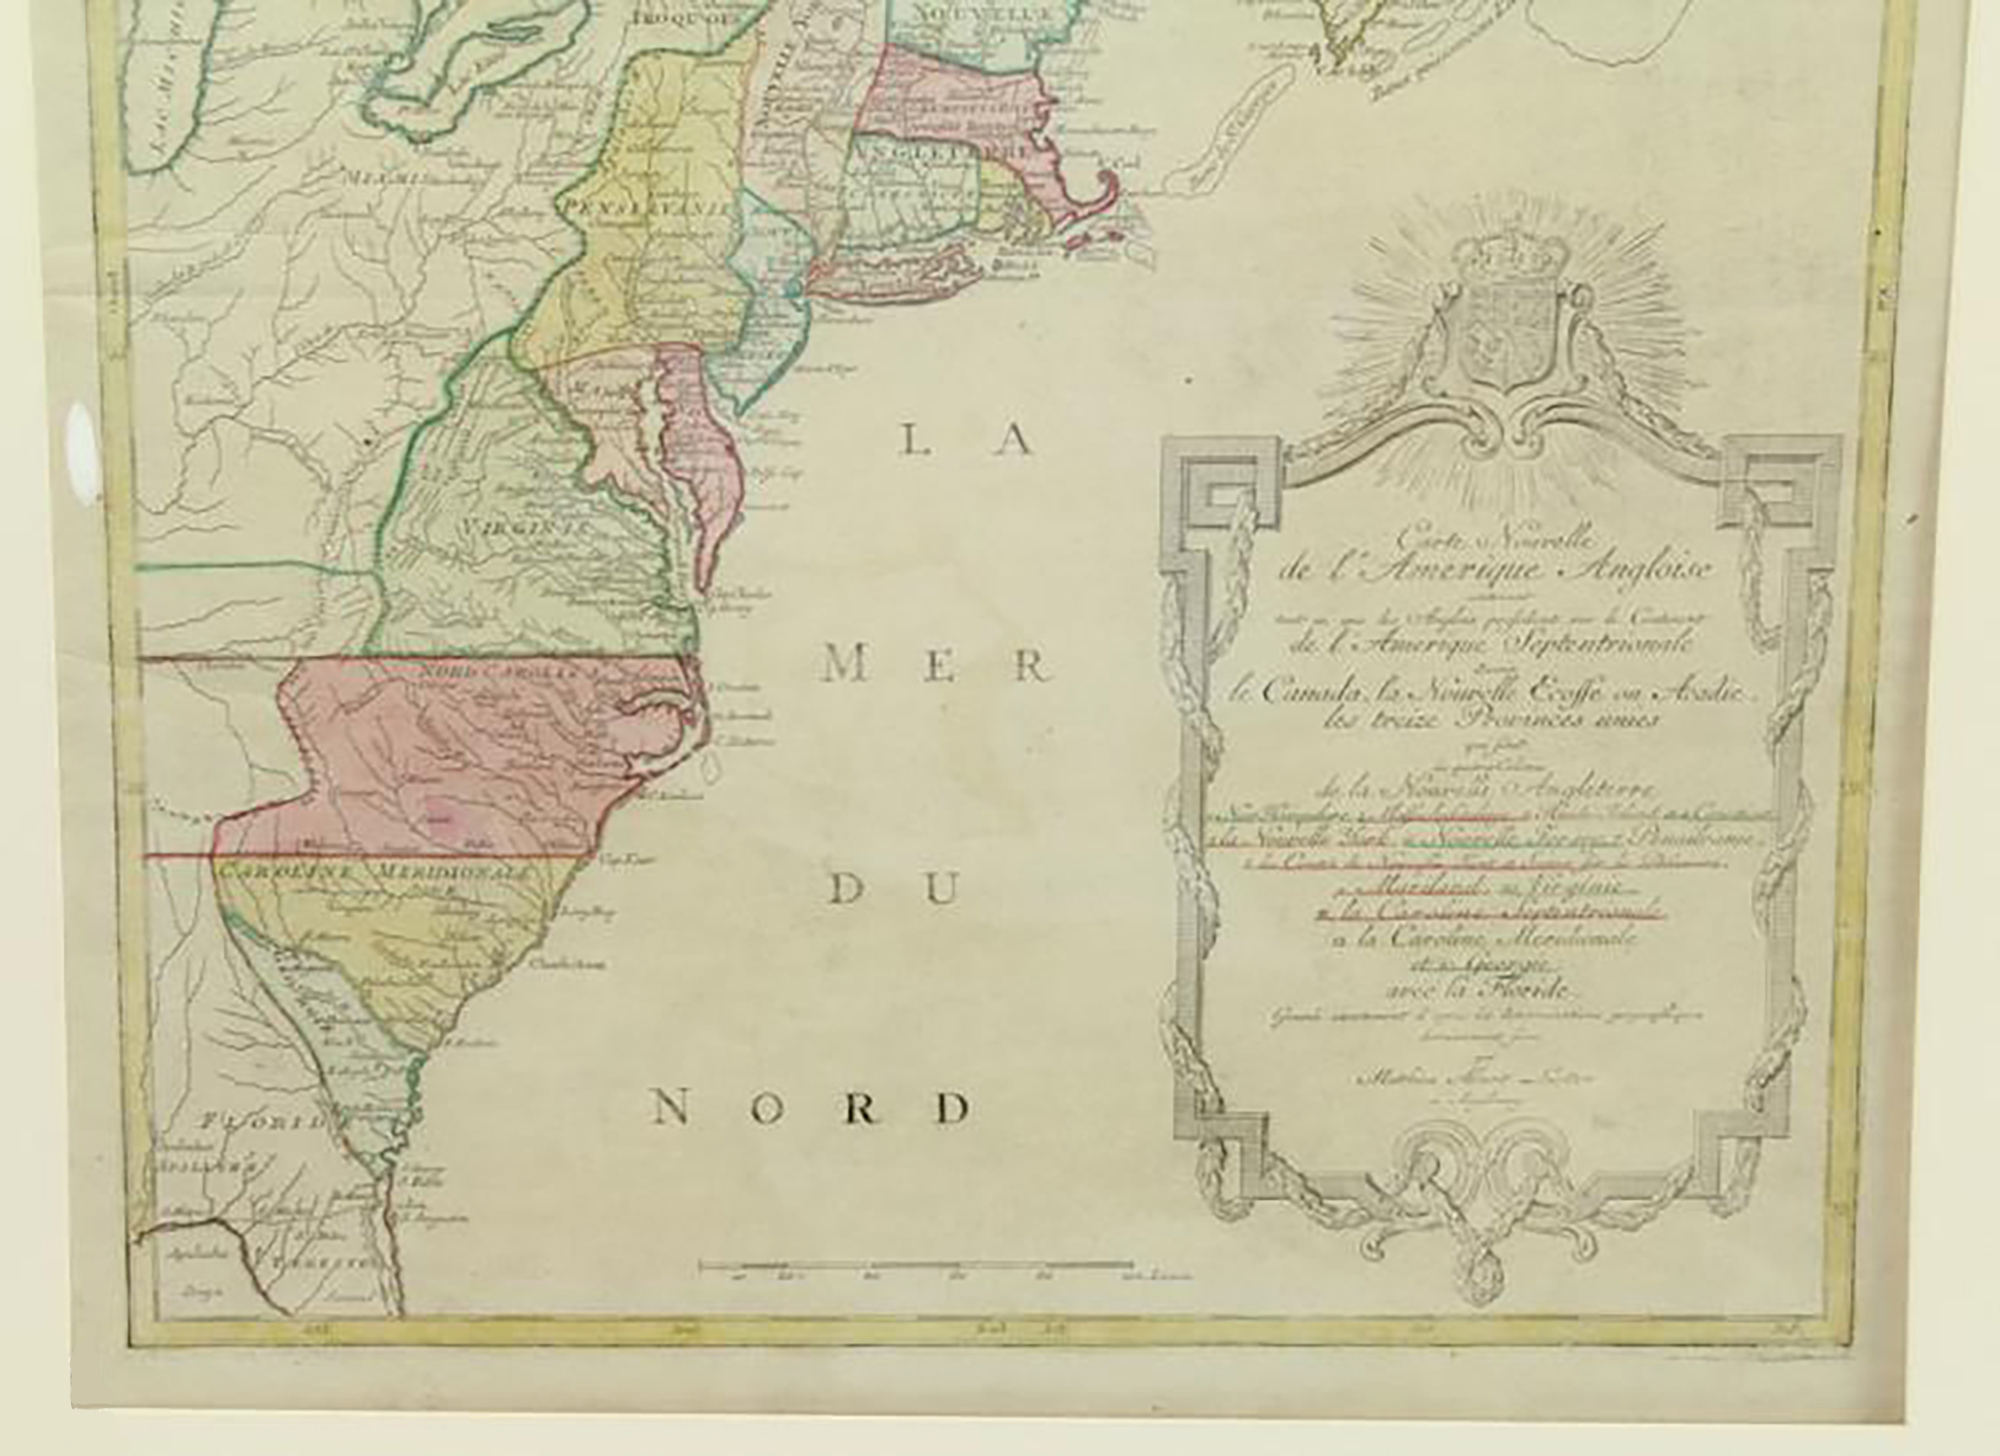 Historic And Important Antique Map Of Colonial America At Start Of The 